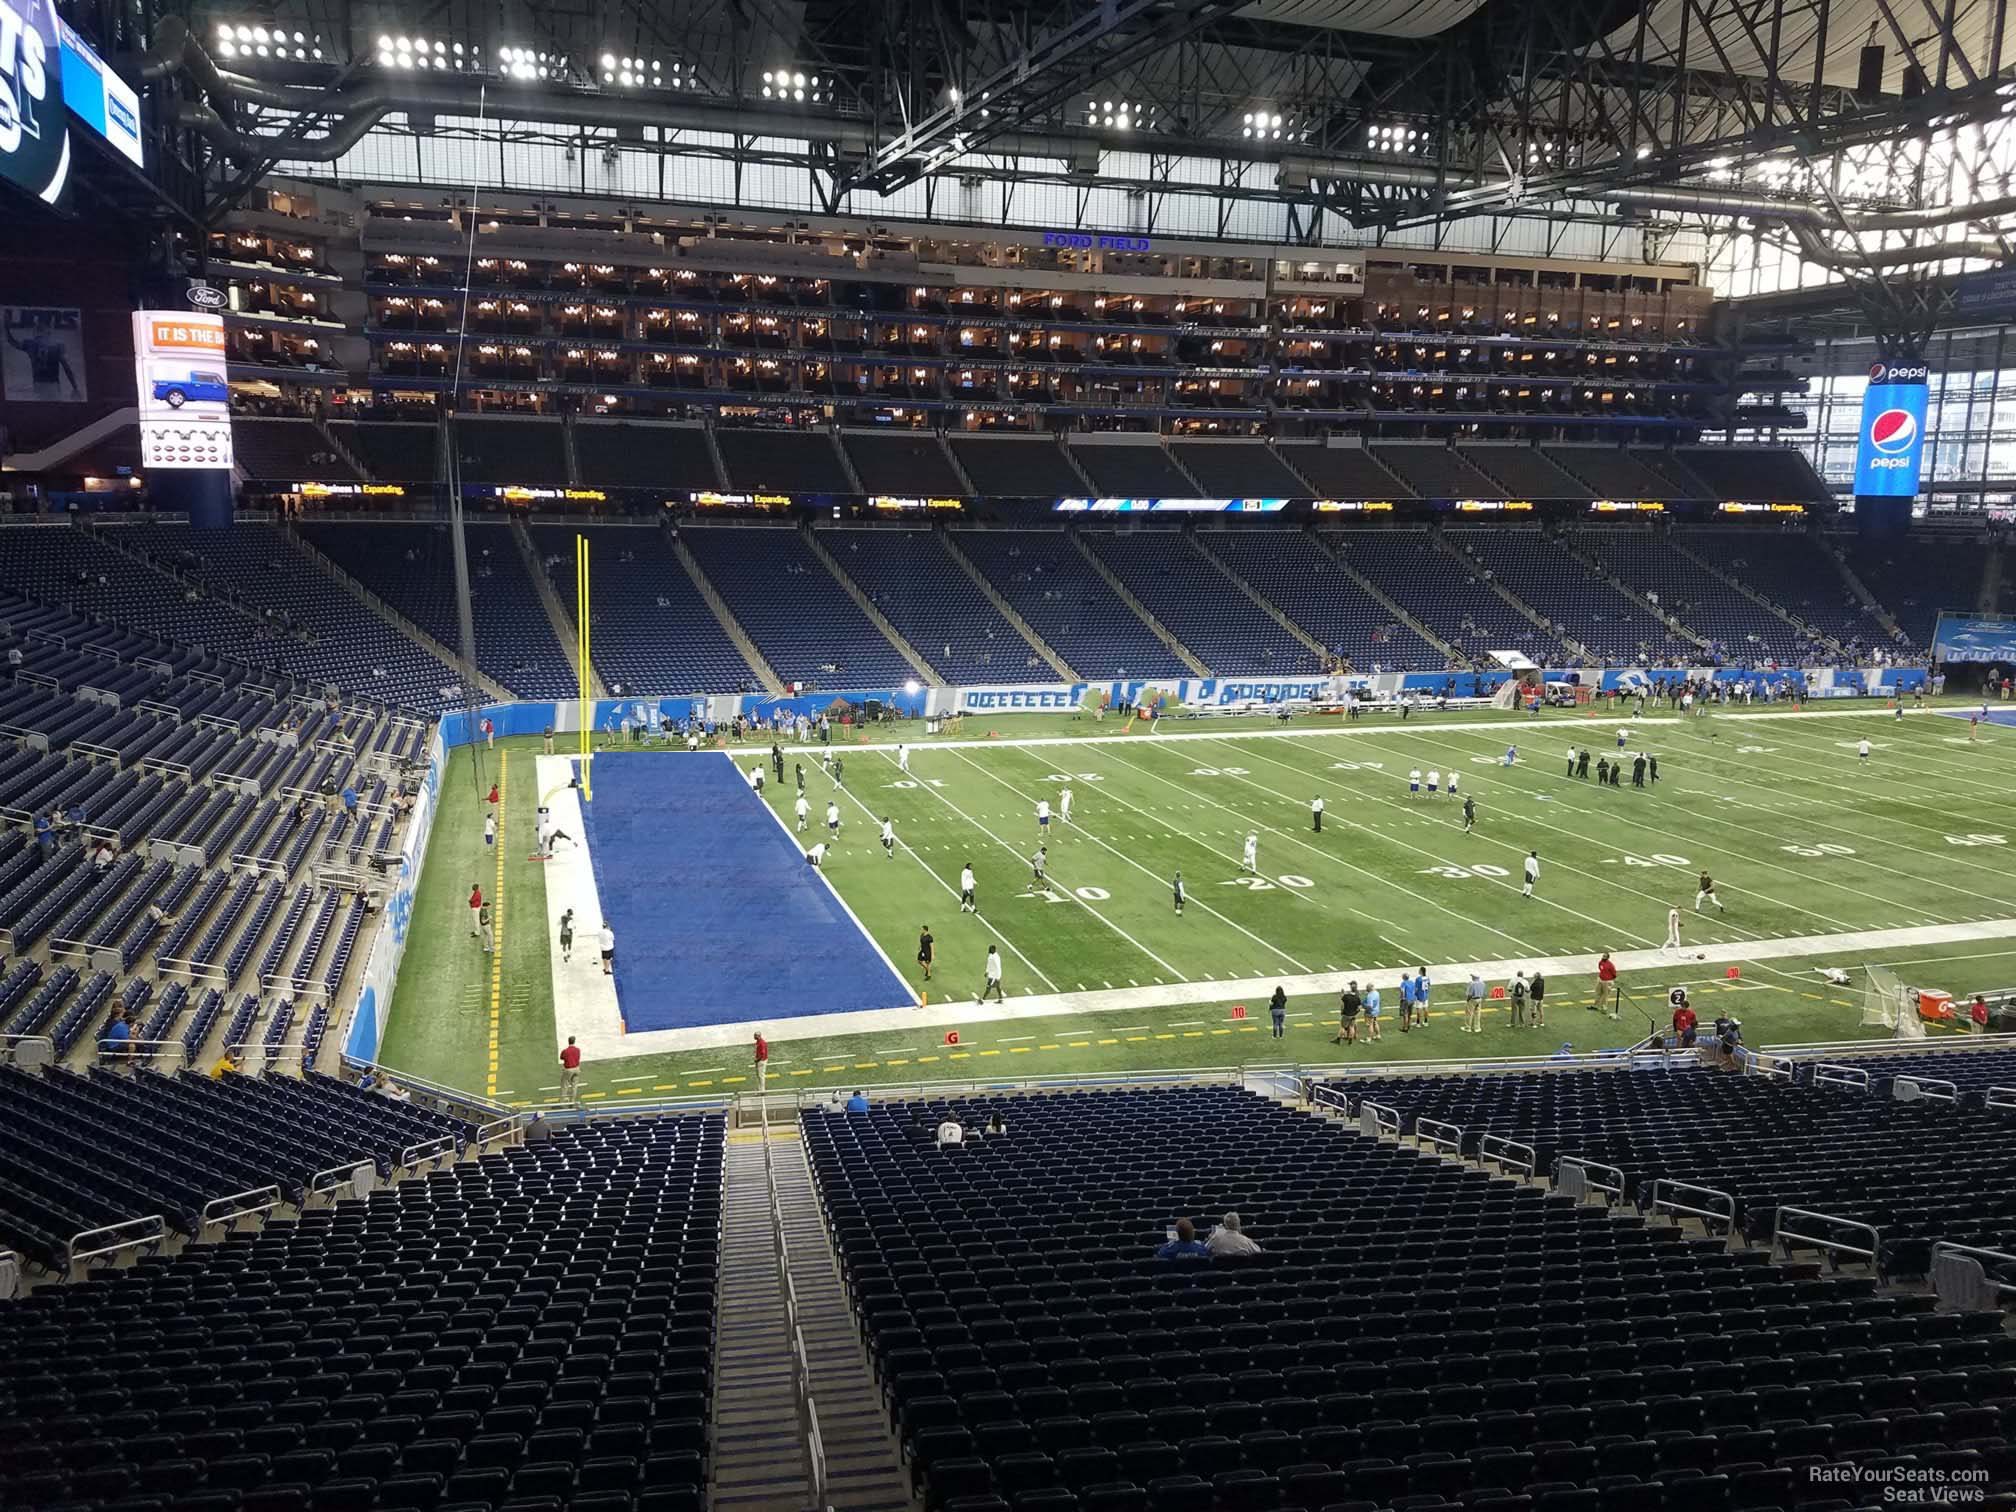 Section 226 at Ford Field